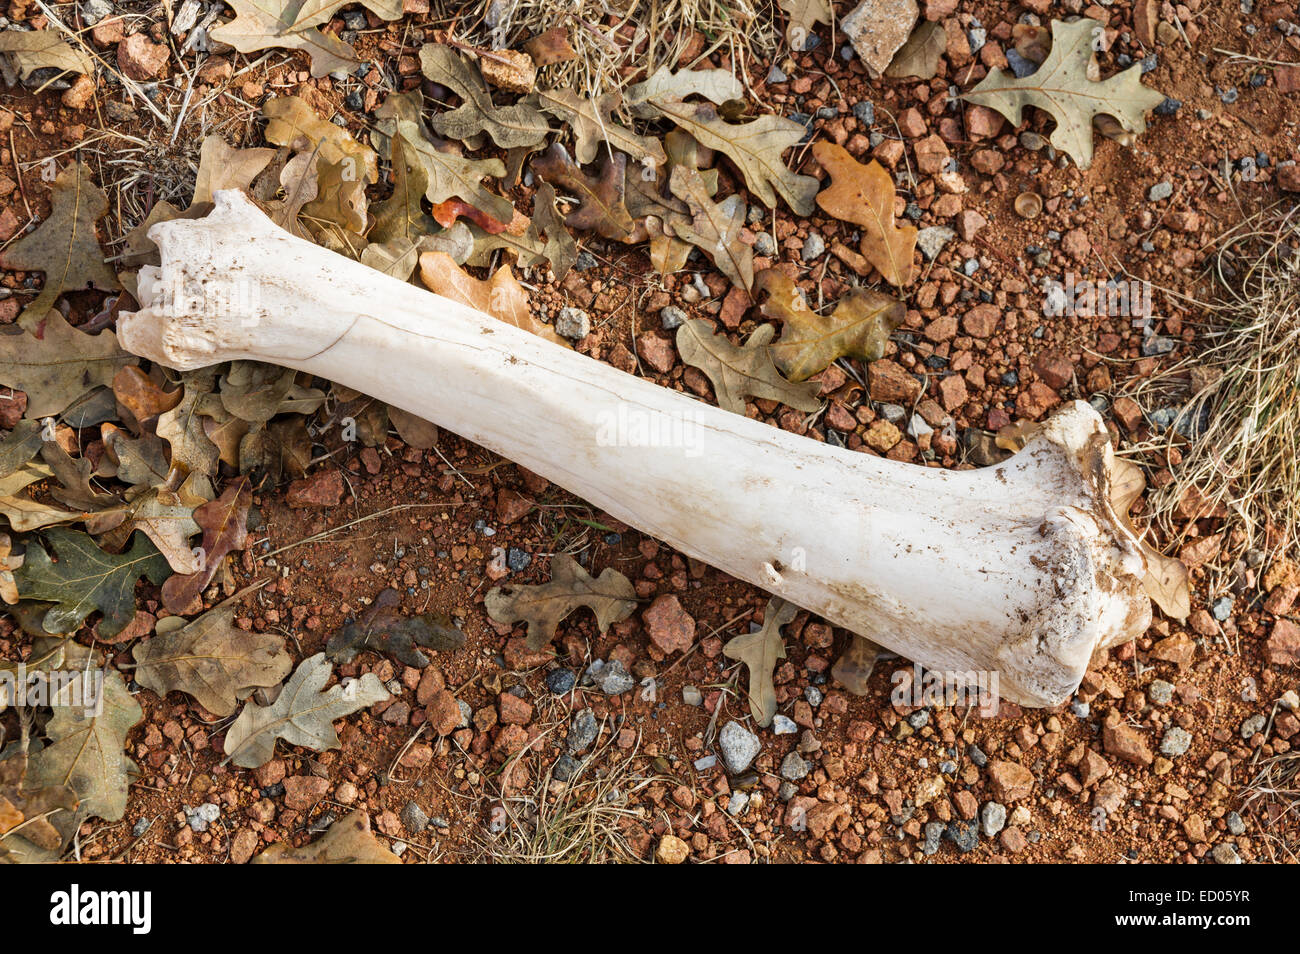 old leg bone on the ground with rocks and fallen oak leaves Stock Photo